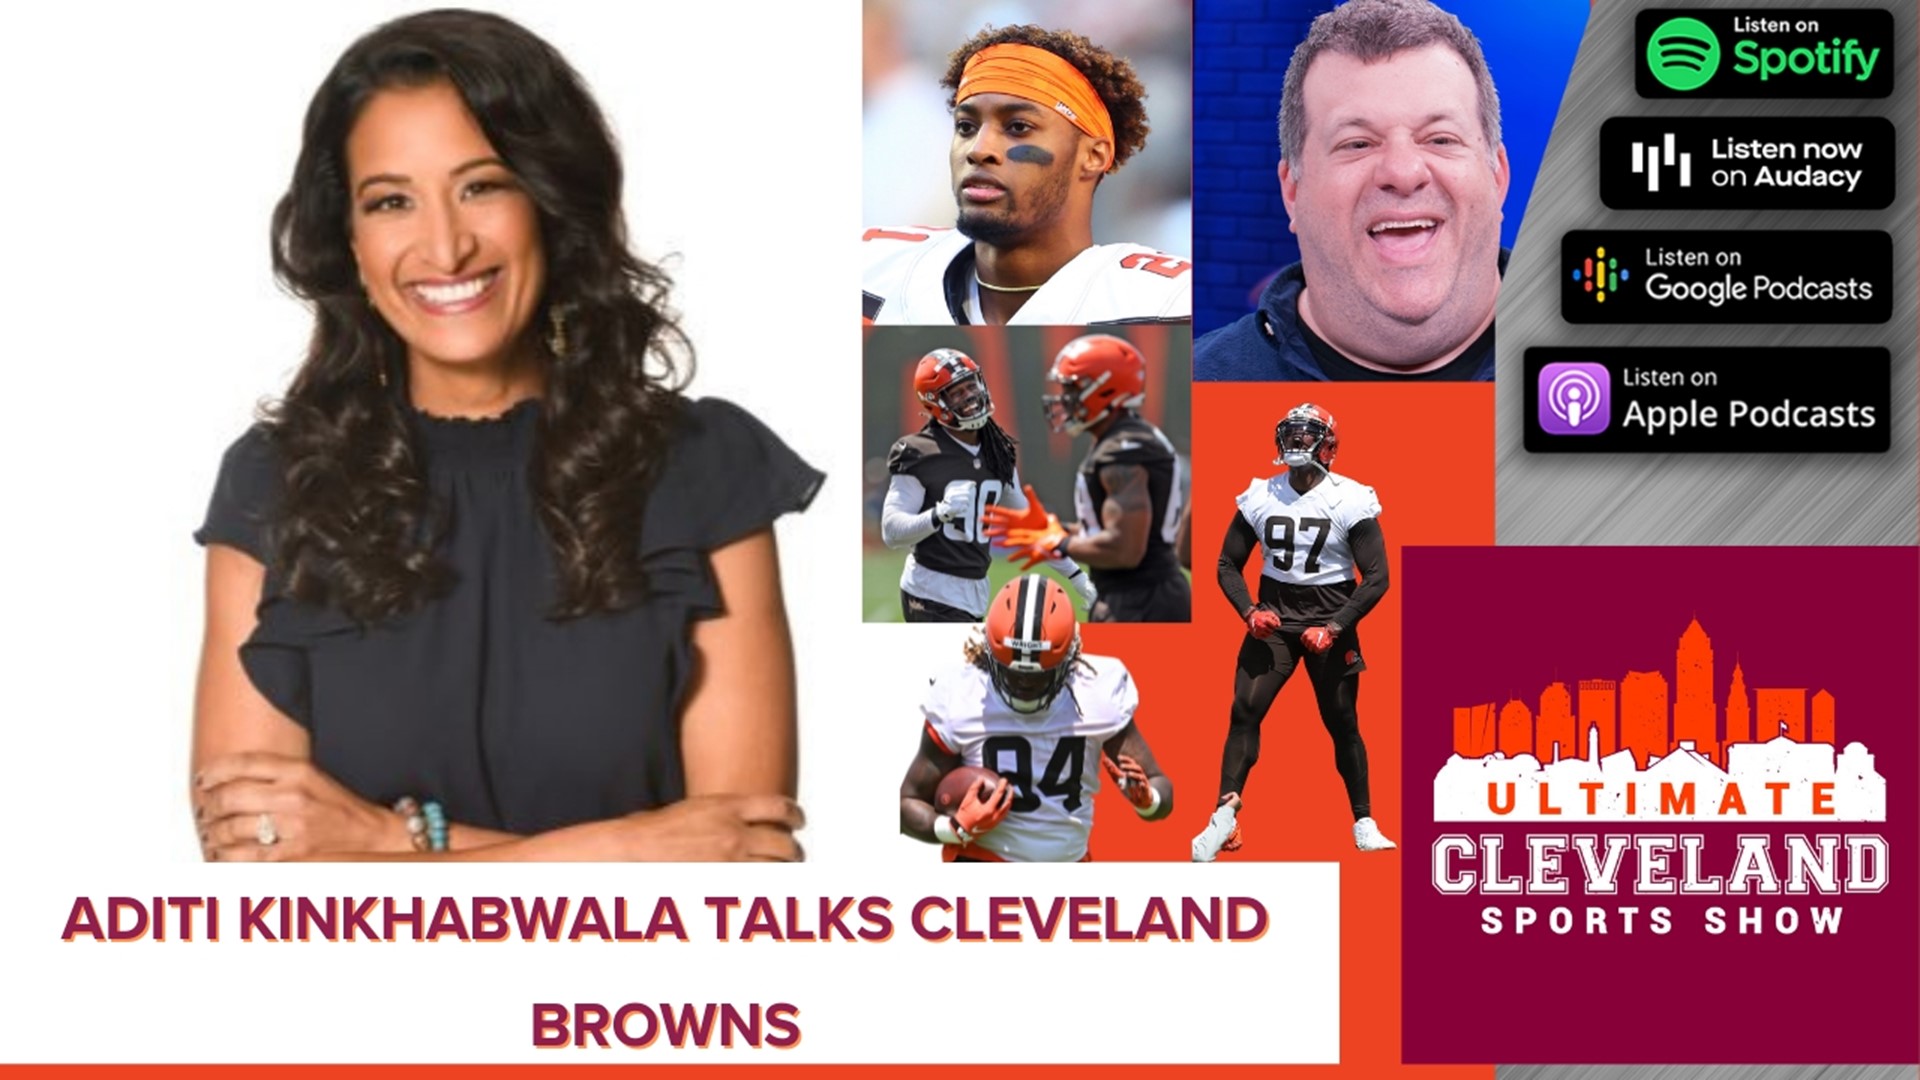 Aditi Kinkhabwala joins UCSS and addresses Tony Grossi and talks about the Cleveland Browns training camp.